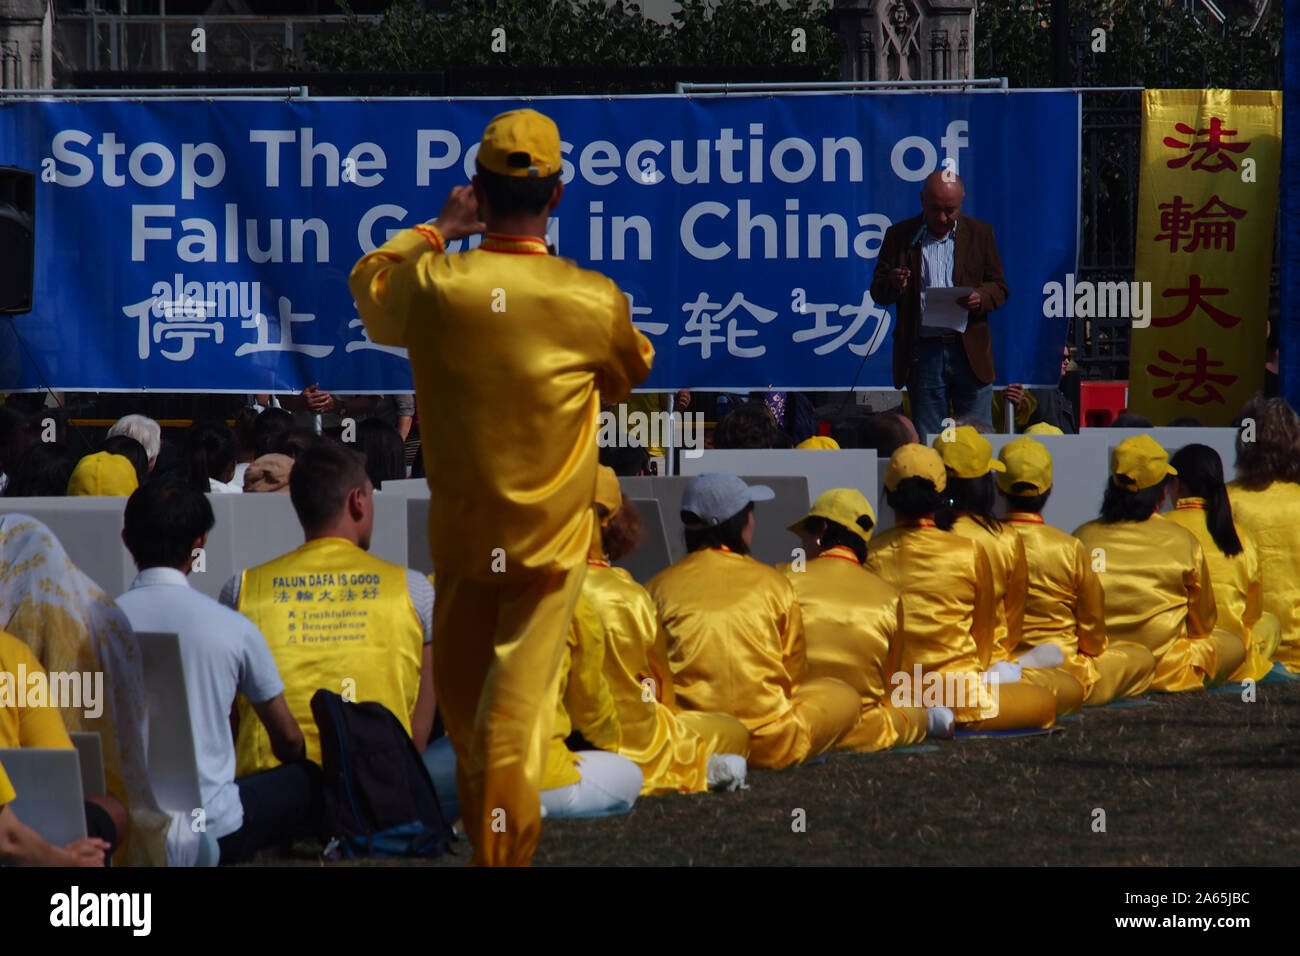 A large group of Chinese people holding a peaceful protest about the persecution of the Falon Gong sect. The protest is in Parliament Square, London Stock Photo